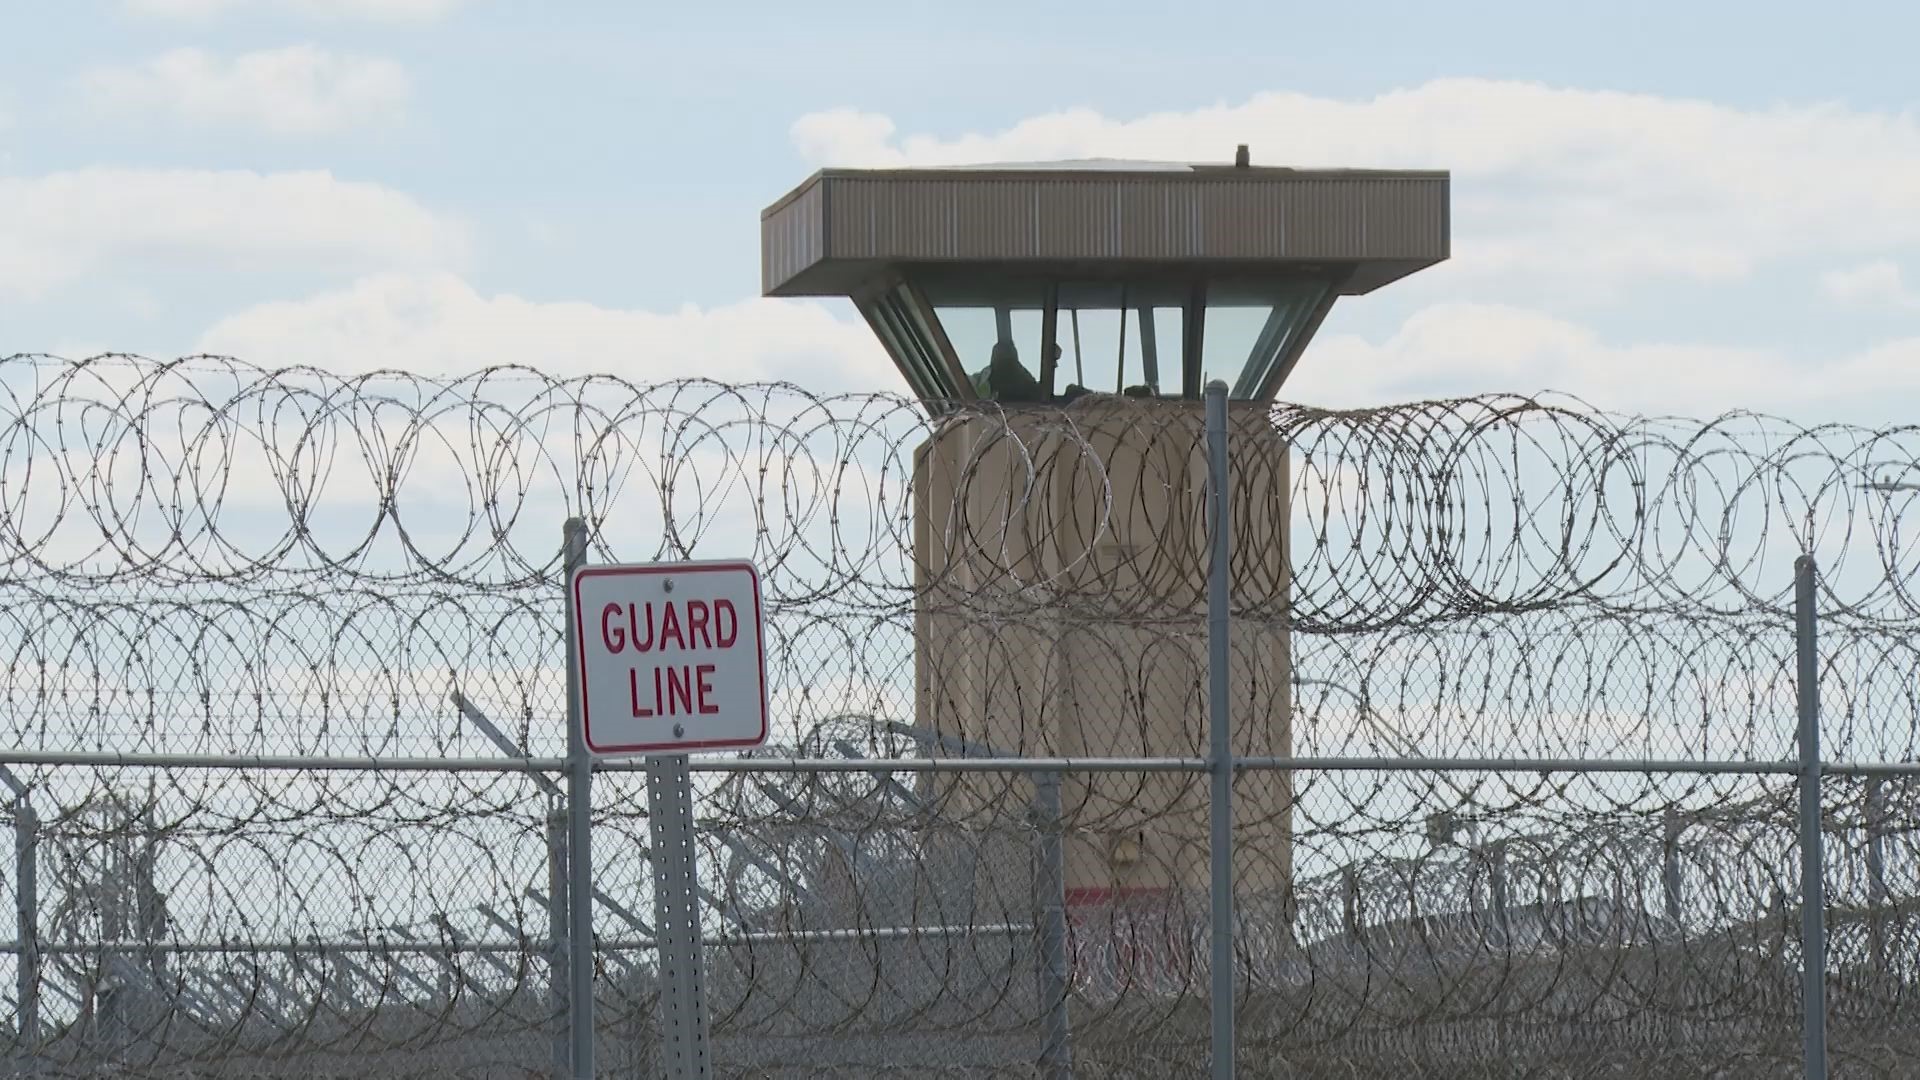 A human rights group in Georgia says the Department of Justice is investigating "systematic problems" at the states prisons.